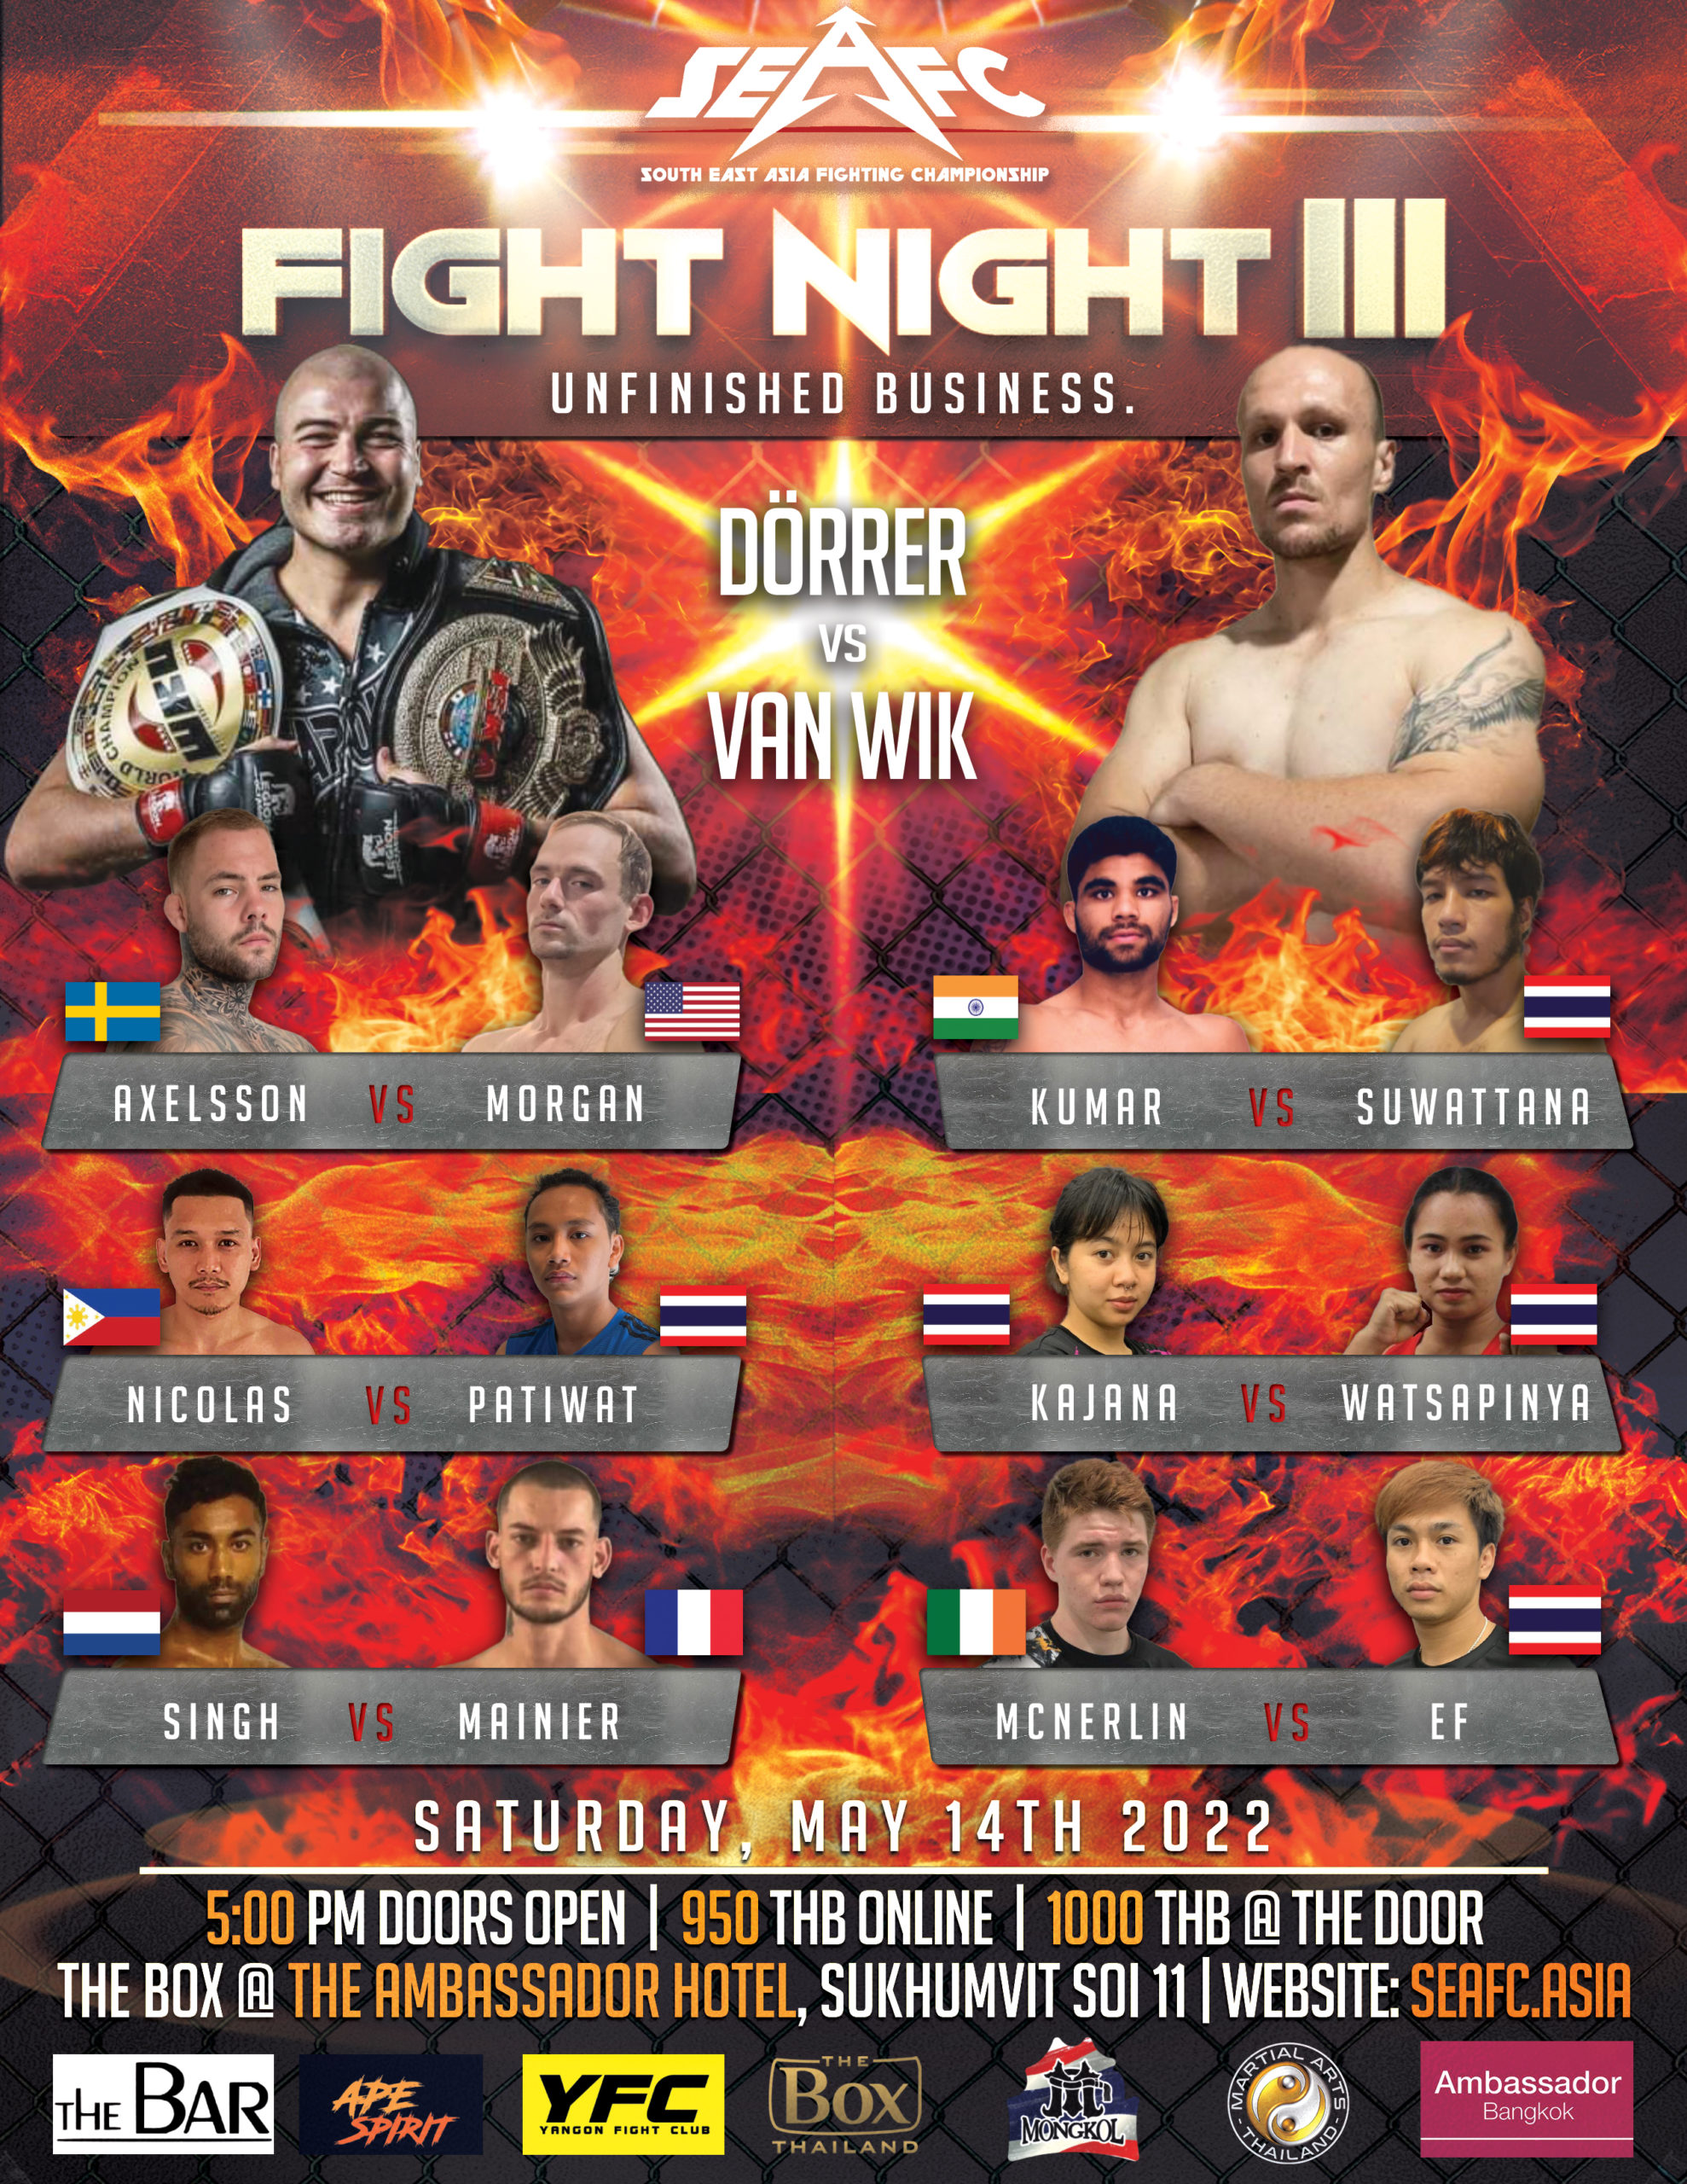 SEAFC FN3 fight cards with fighters images